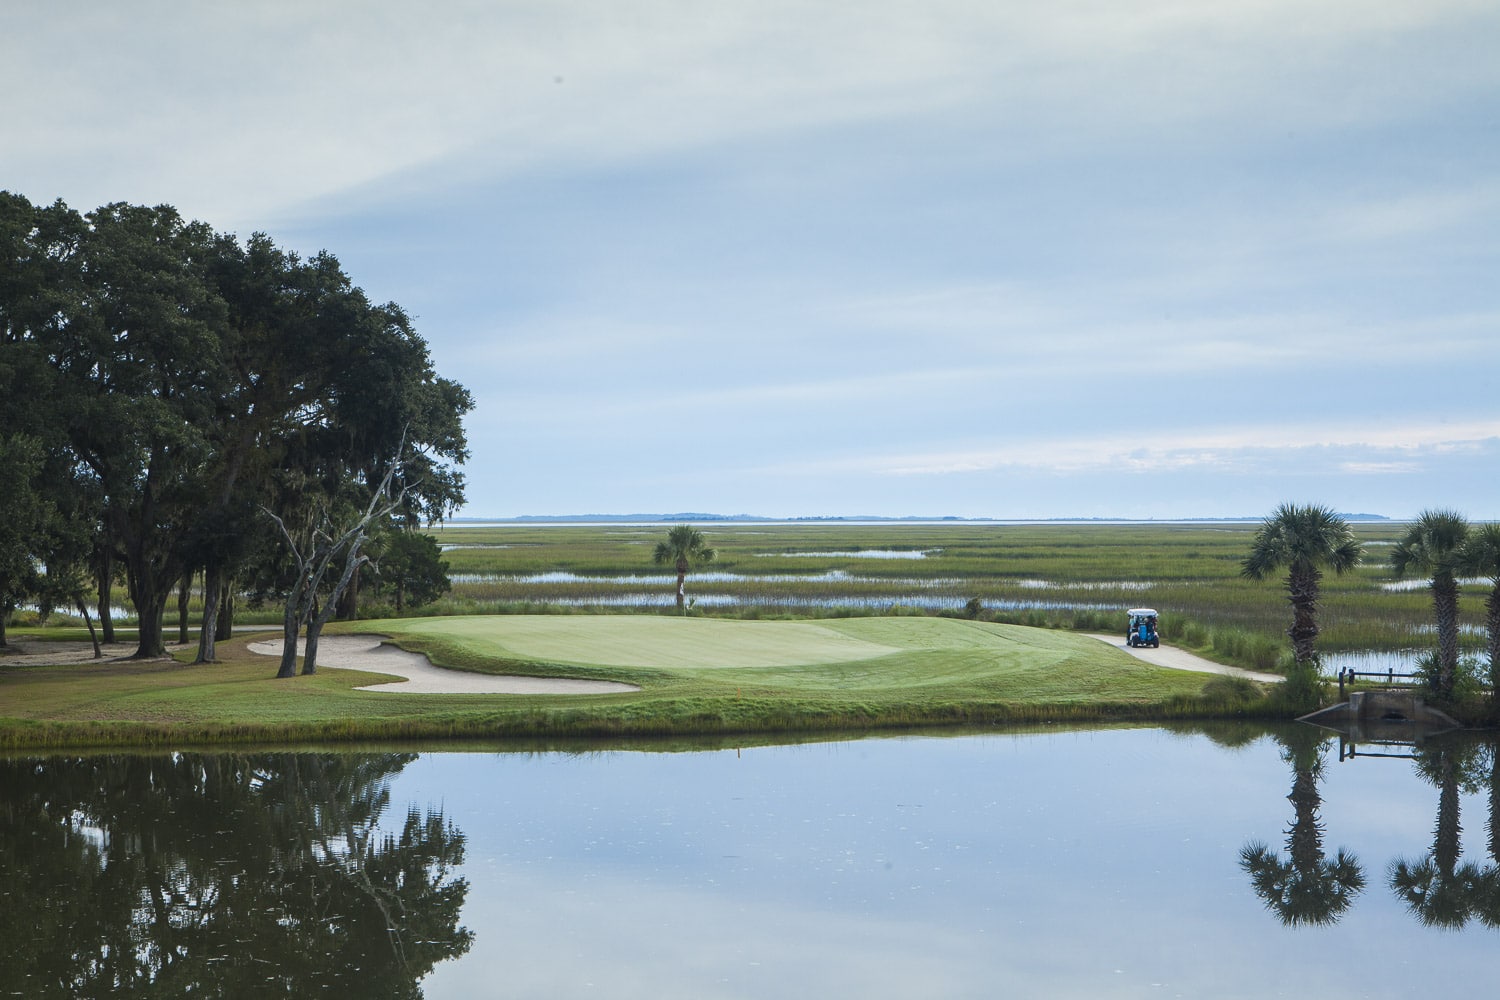 A calm lagoon lies in front of a golf course green at The Landings.